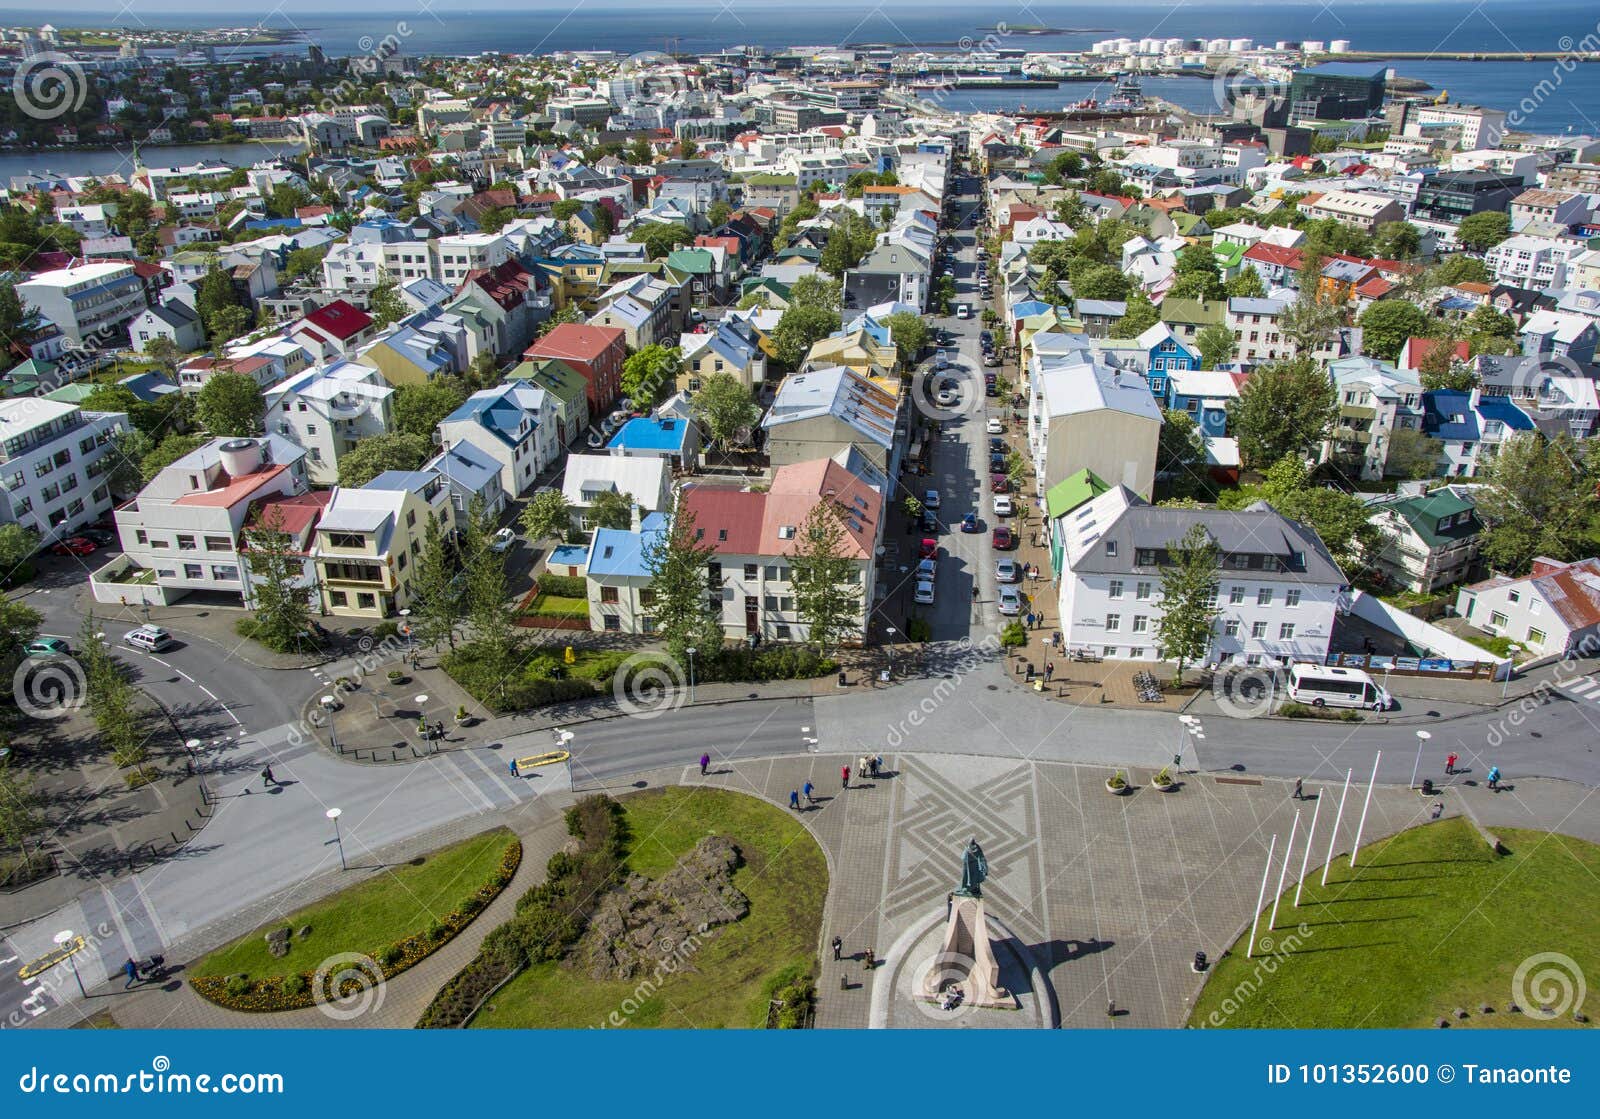 Aerial View of Reykjavik, Capital of Iceland. Editorial Image - Image ...